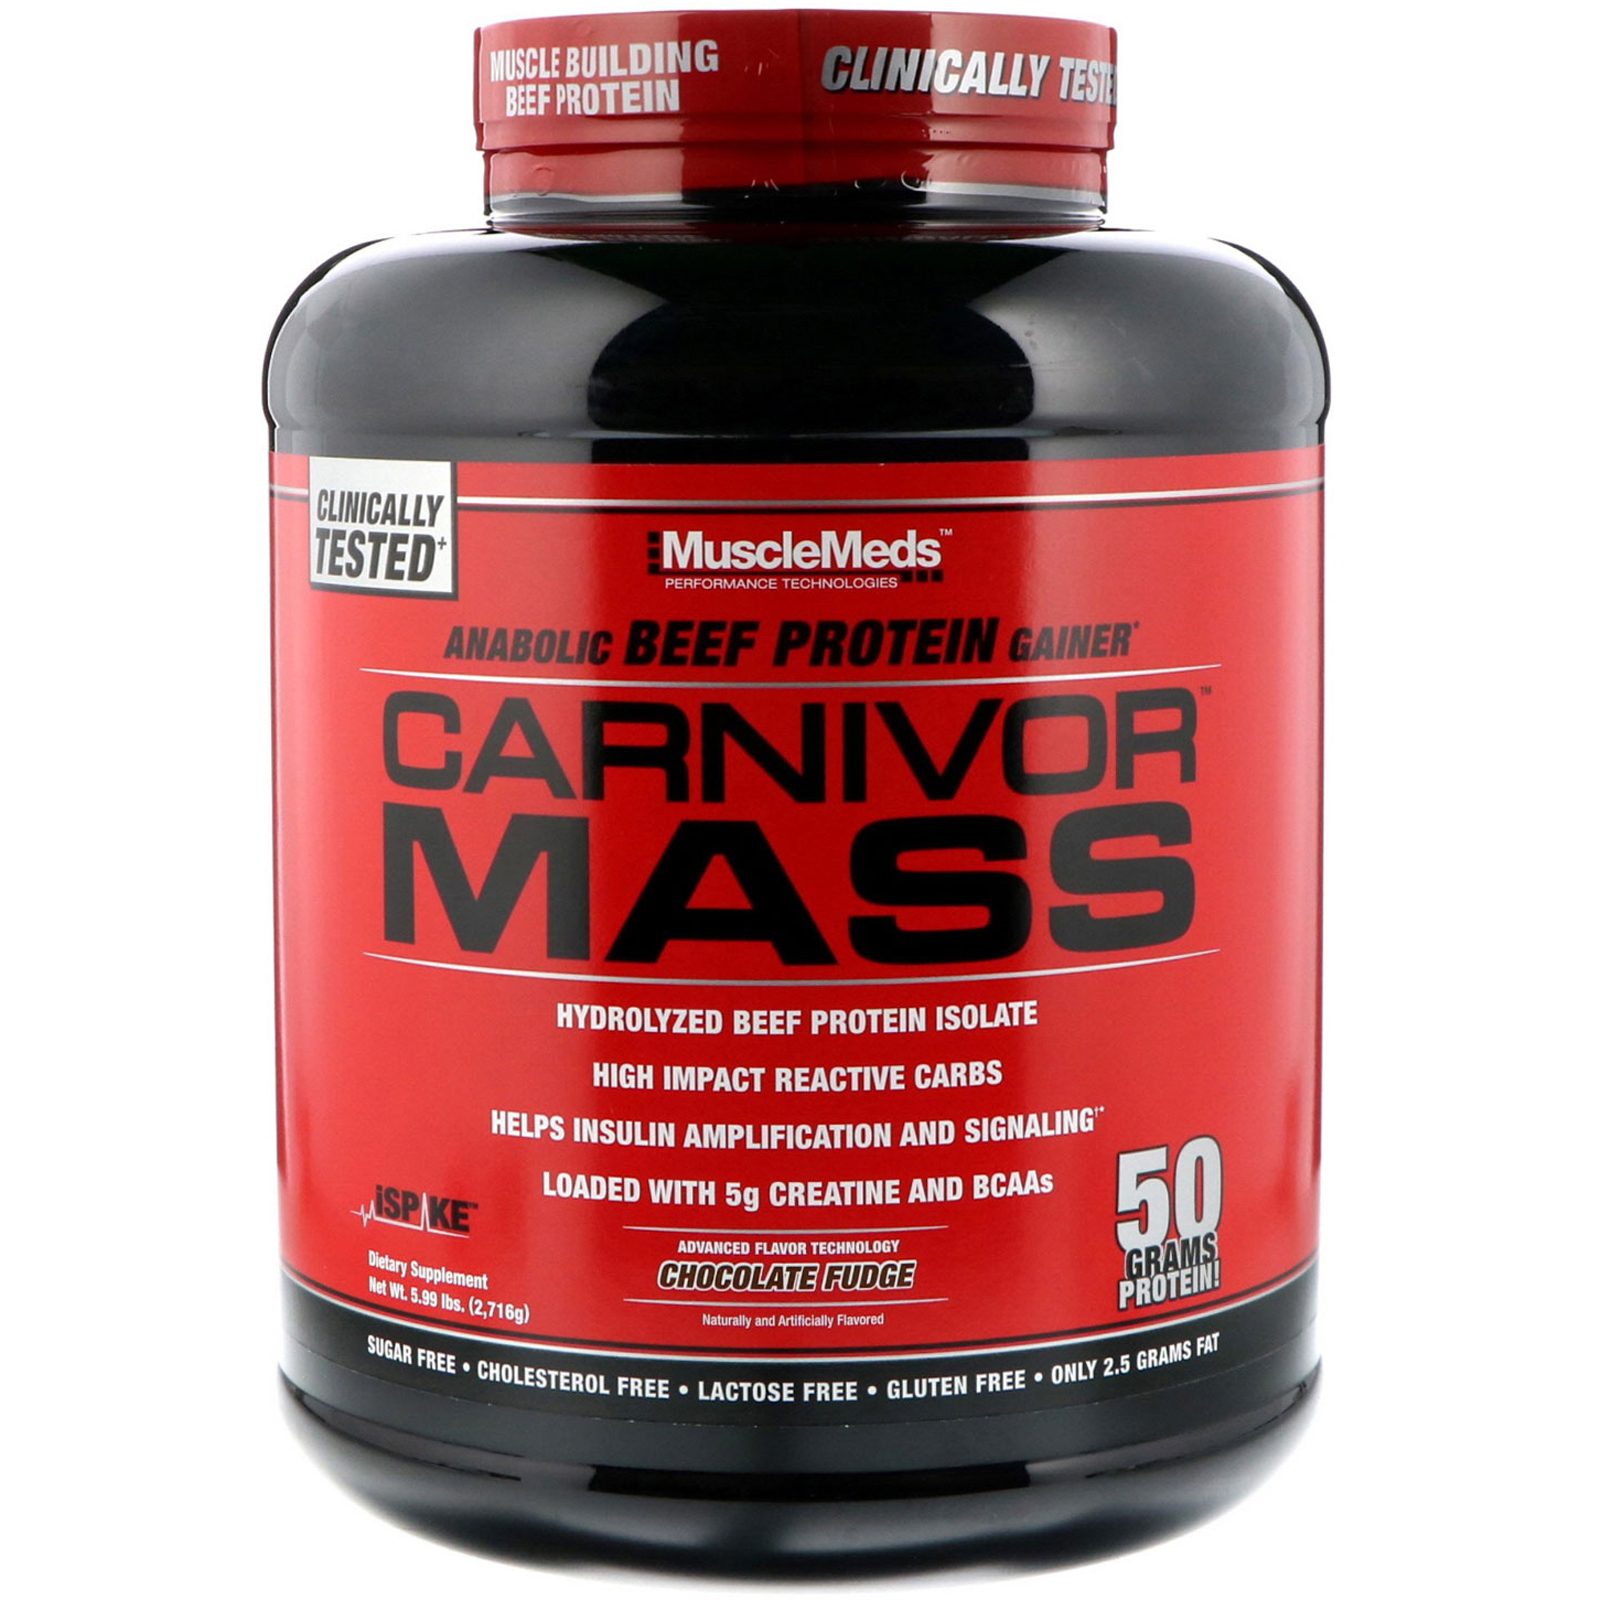 Musclemeds Carnivor Mass Anabolic Beef Protein Gainer Chocolate Fudge 5 99 Lbs 2 716 G Iherb